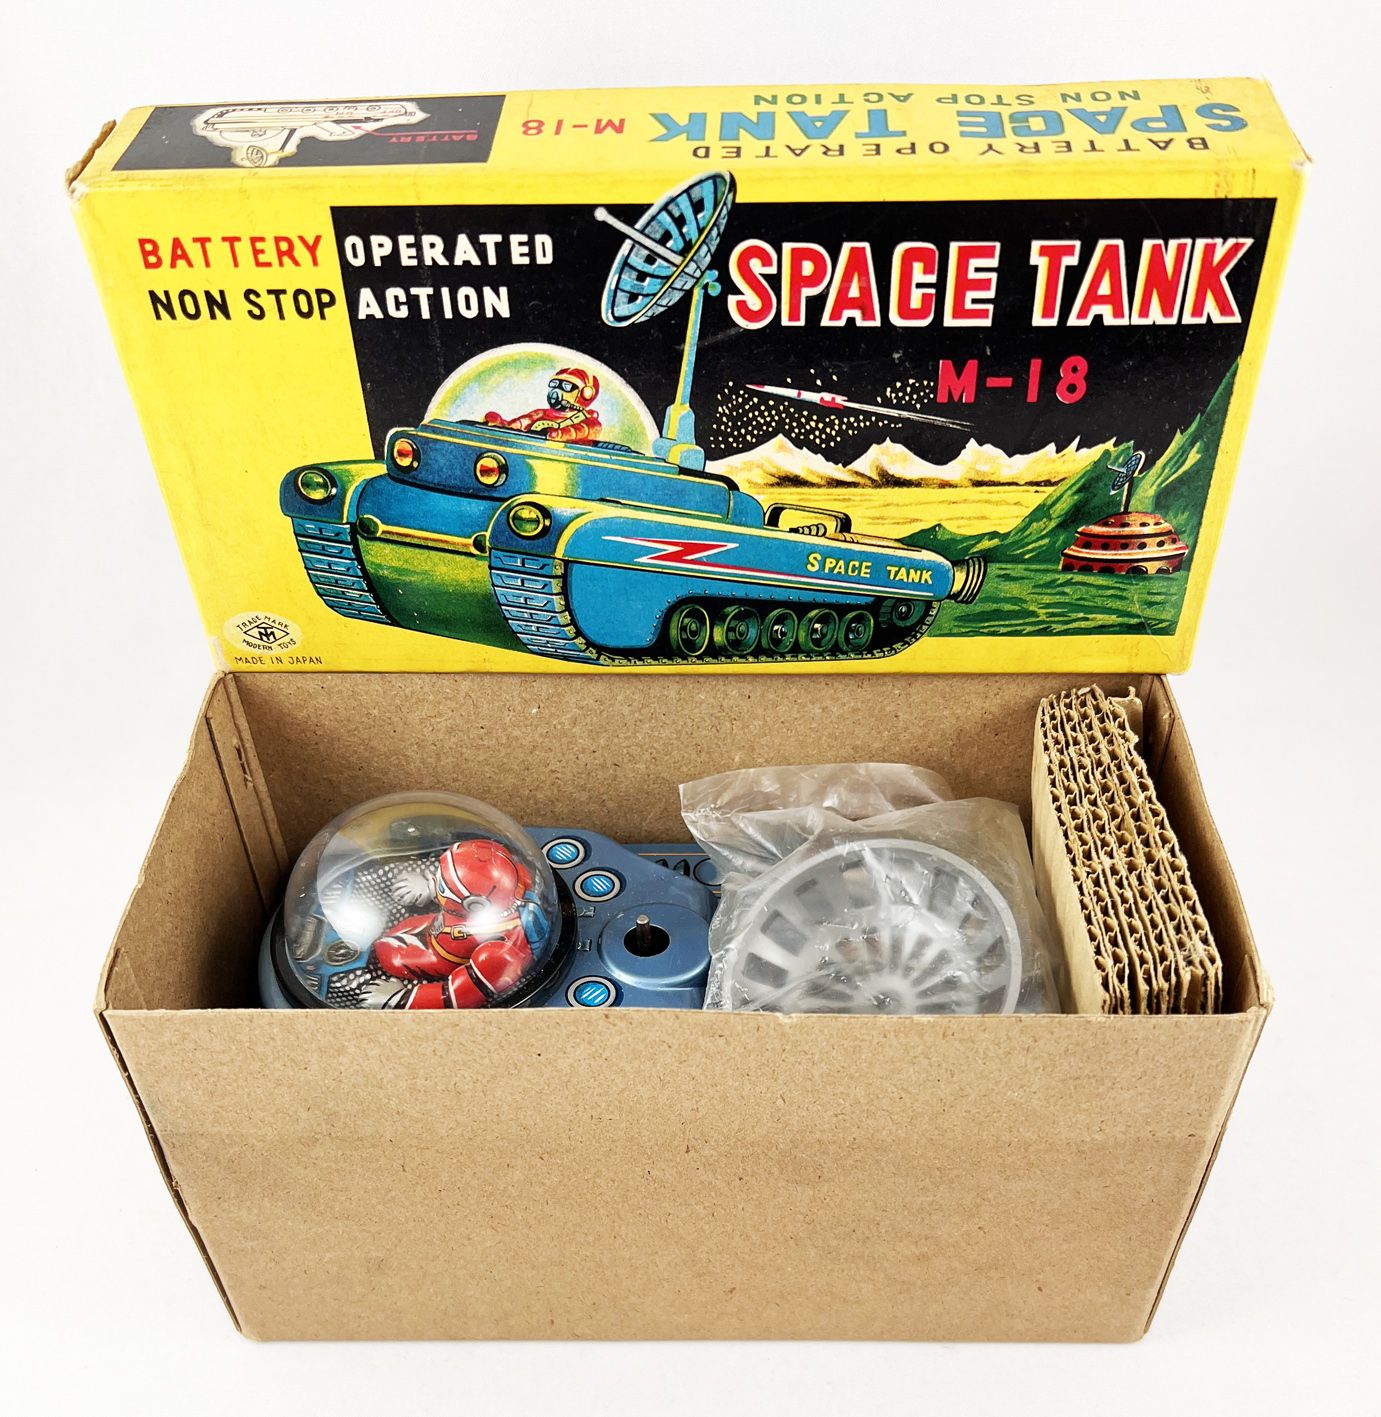 Les Jouets Japonais/Japanese Toys from the Late 50s and 60s by